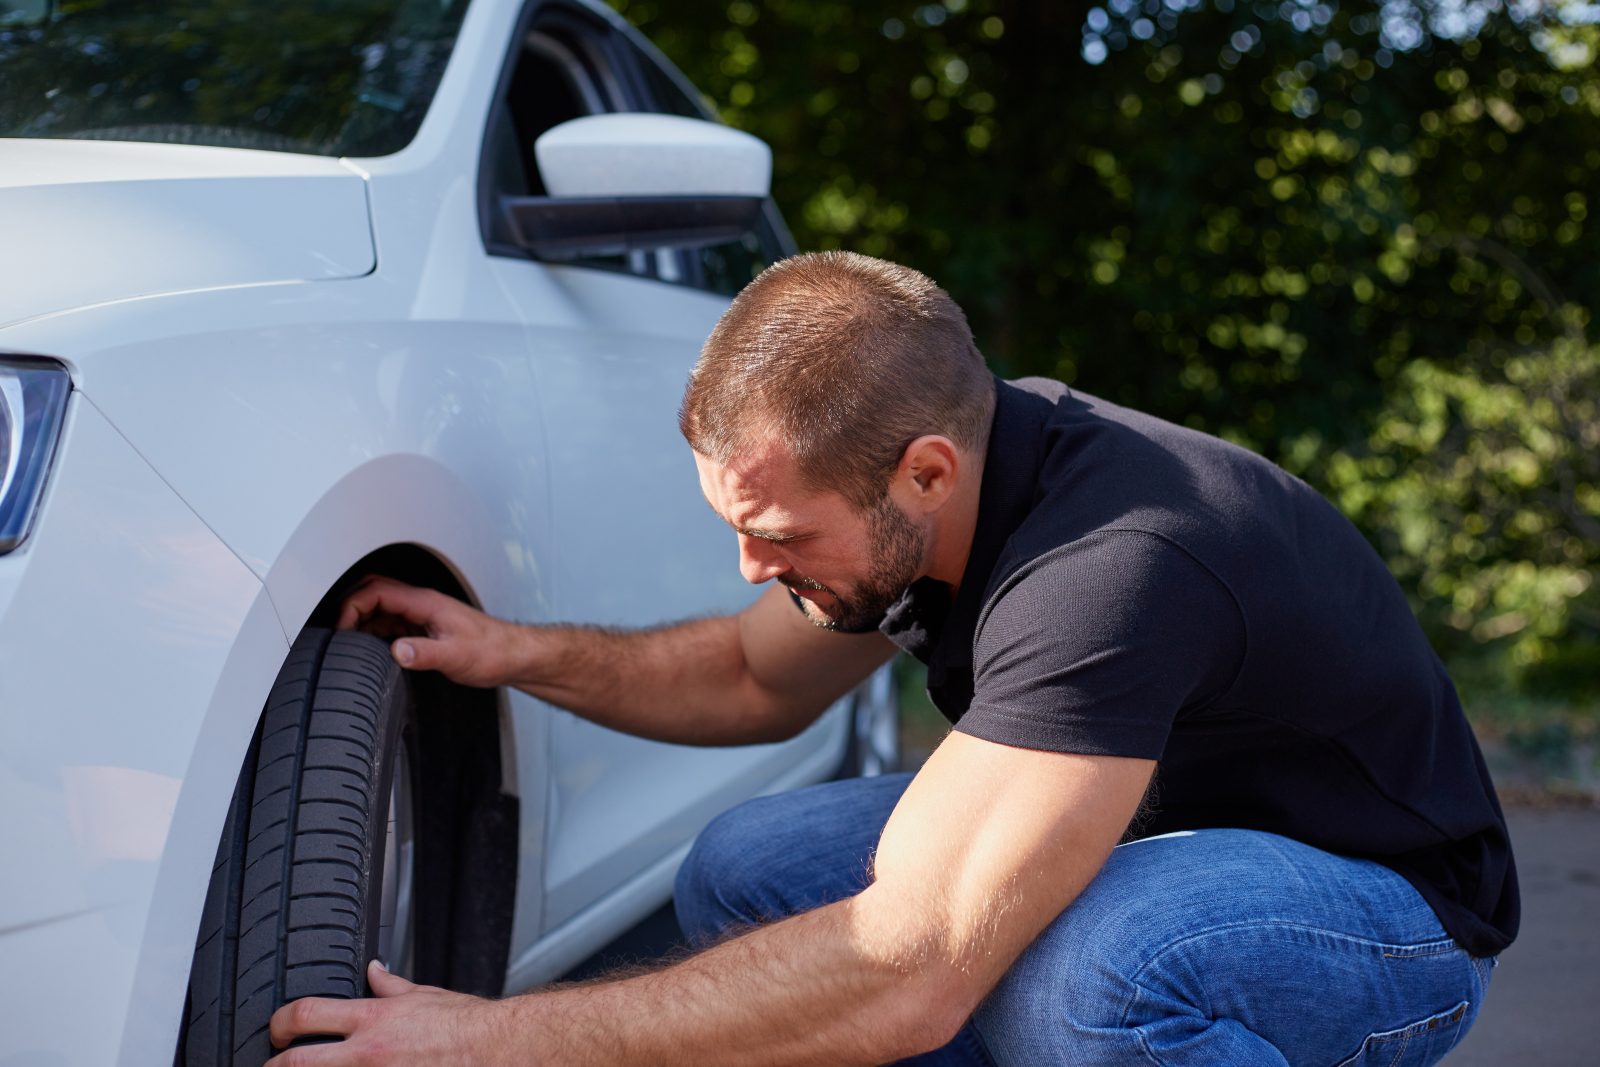 Basic car maintenance tips all drivers should know